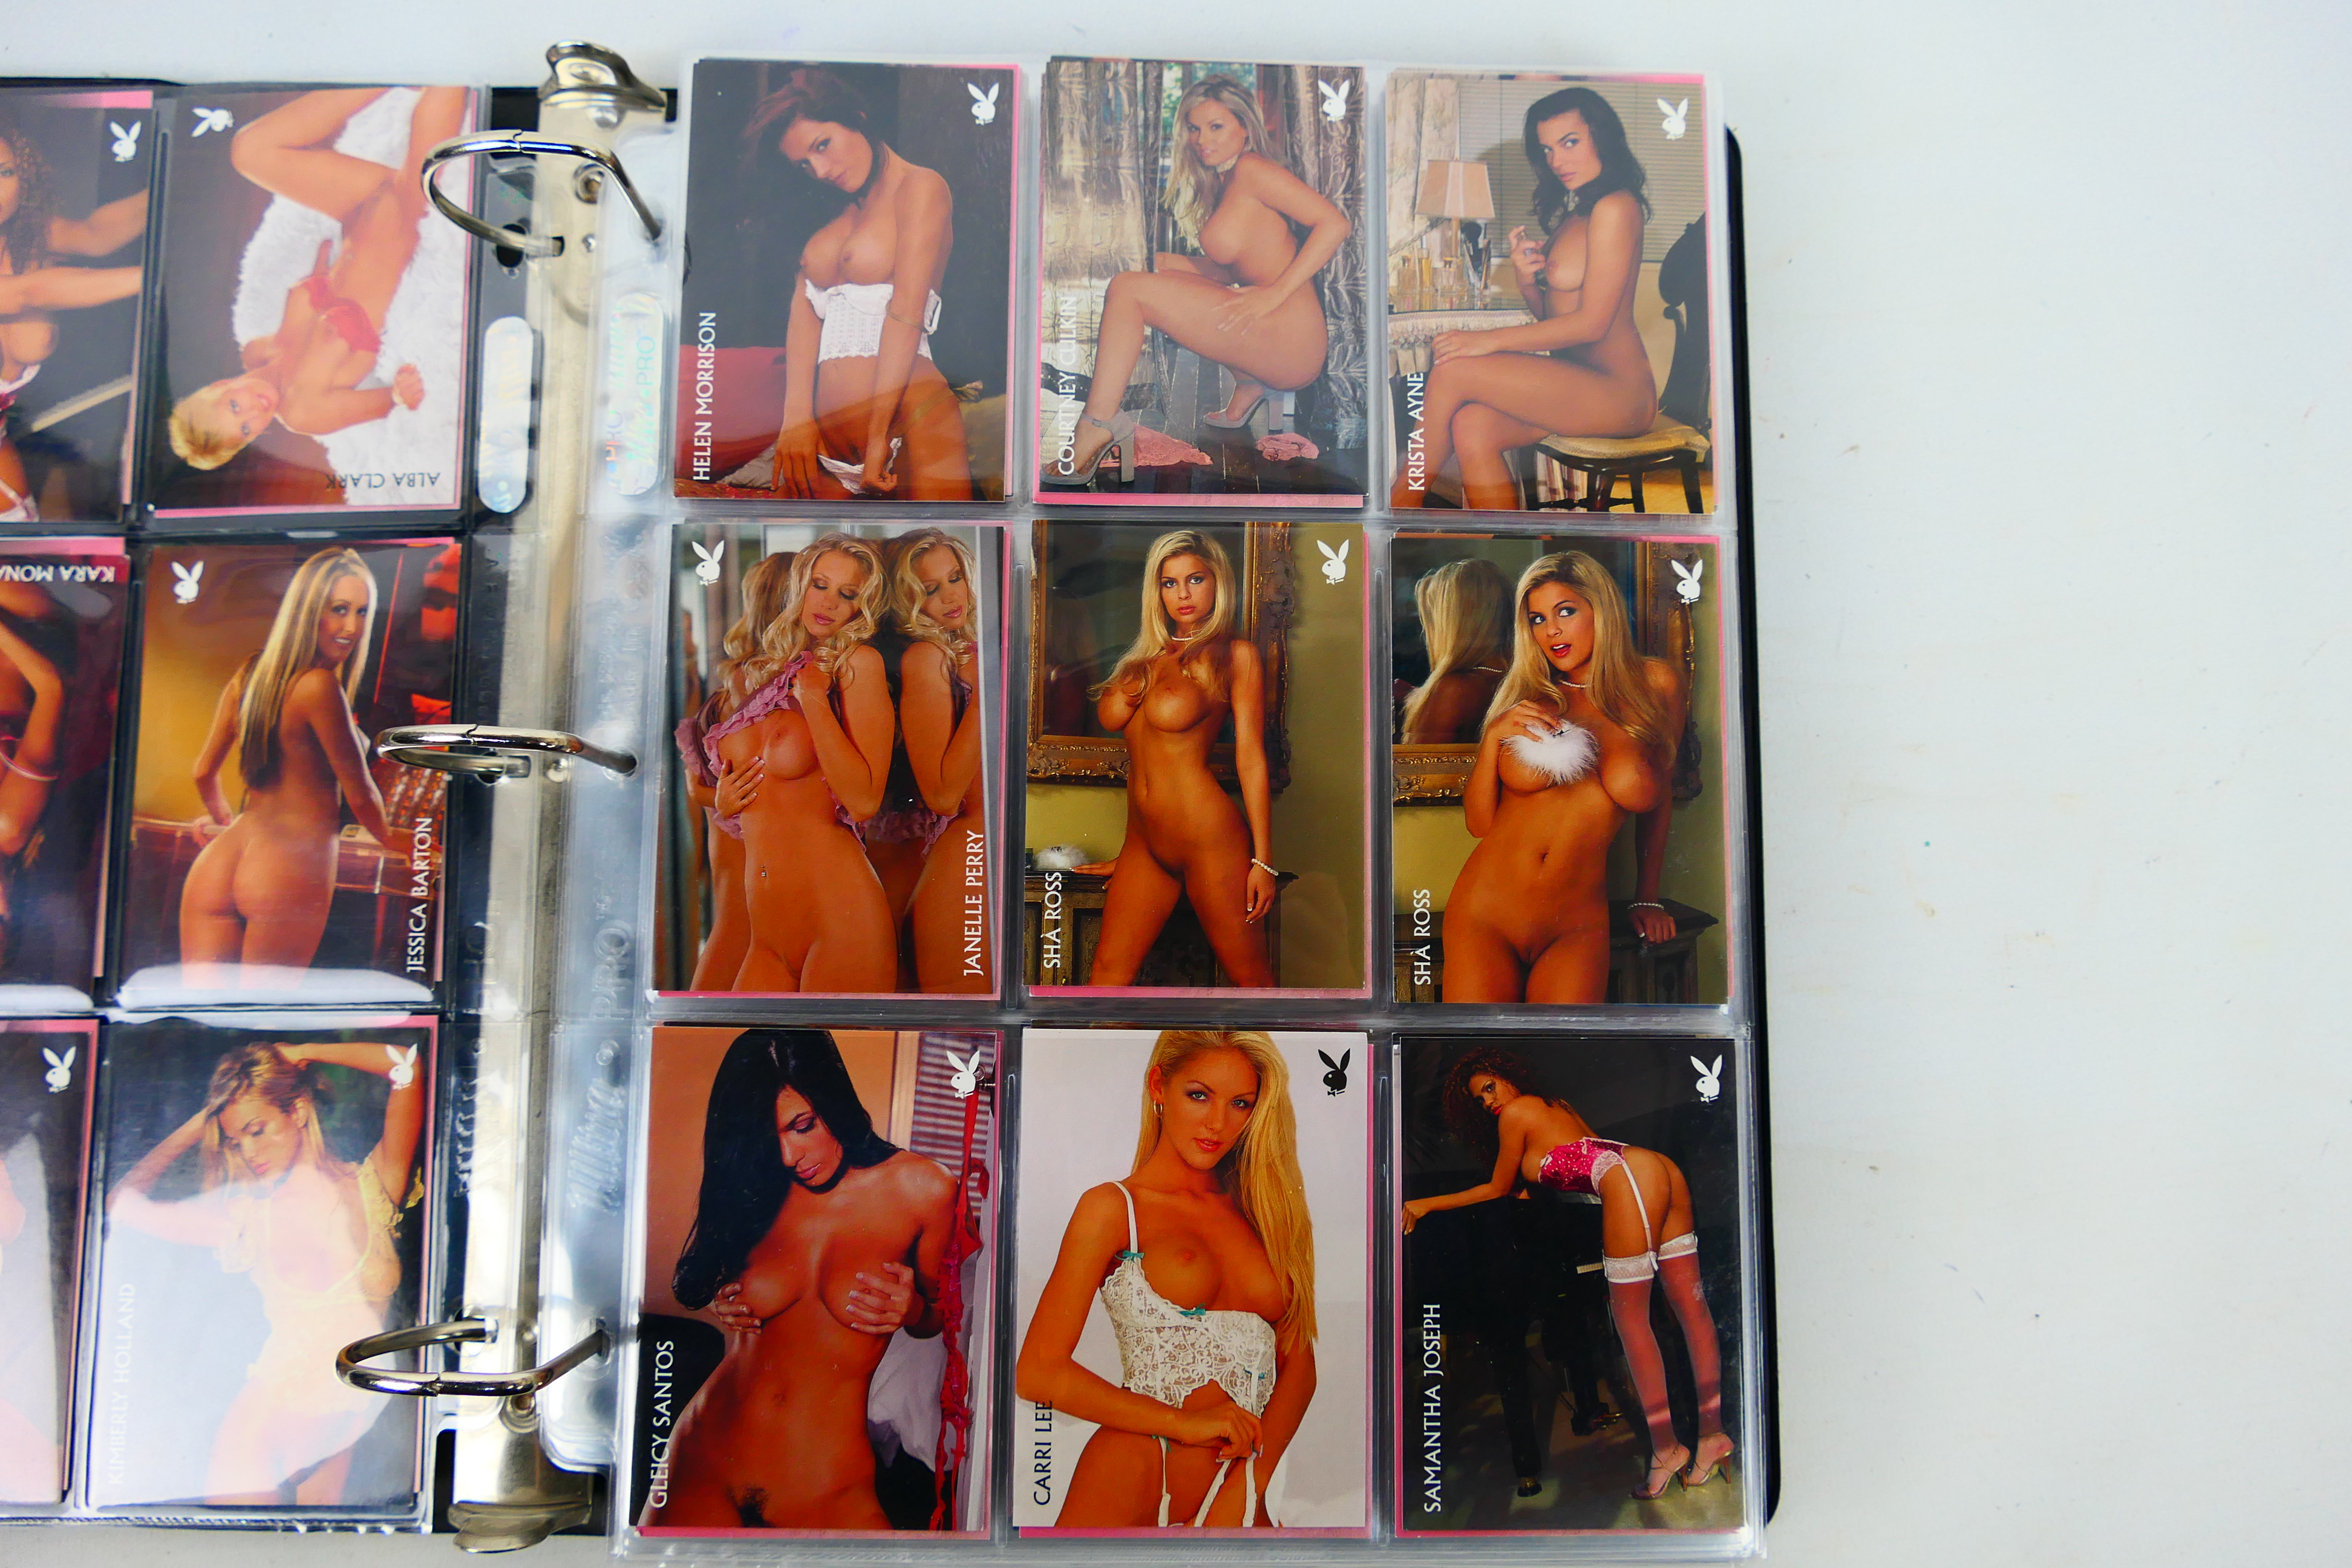 Playboy - A collection of over 250 loose Playboy trading cards. - Image 3 of 8